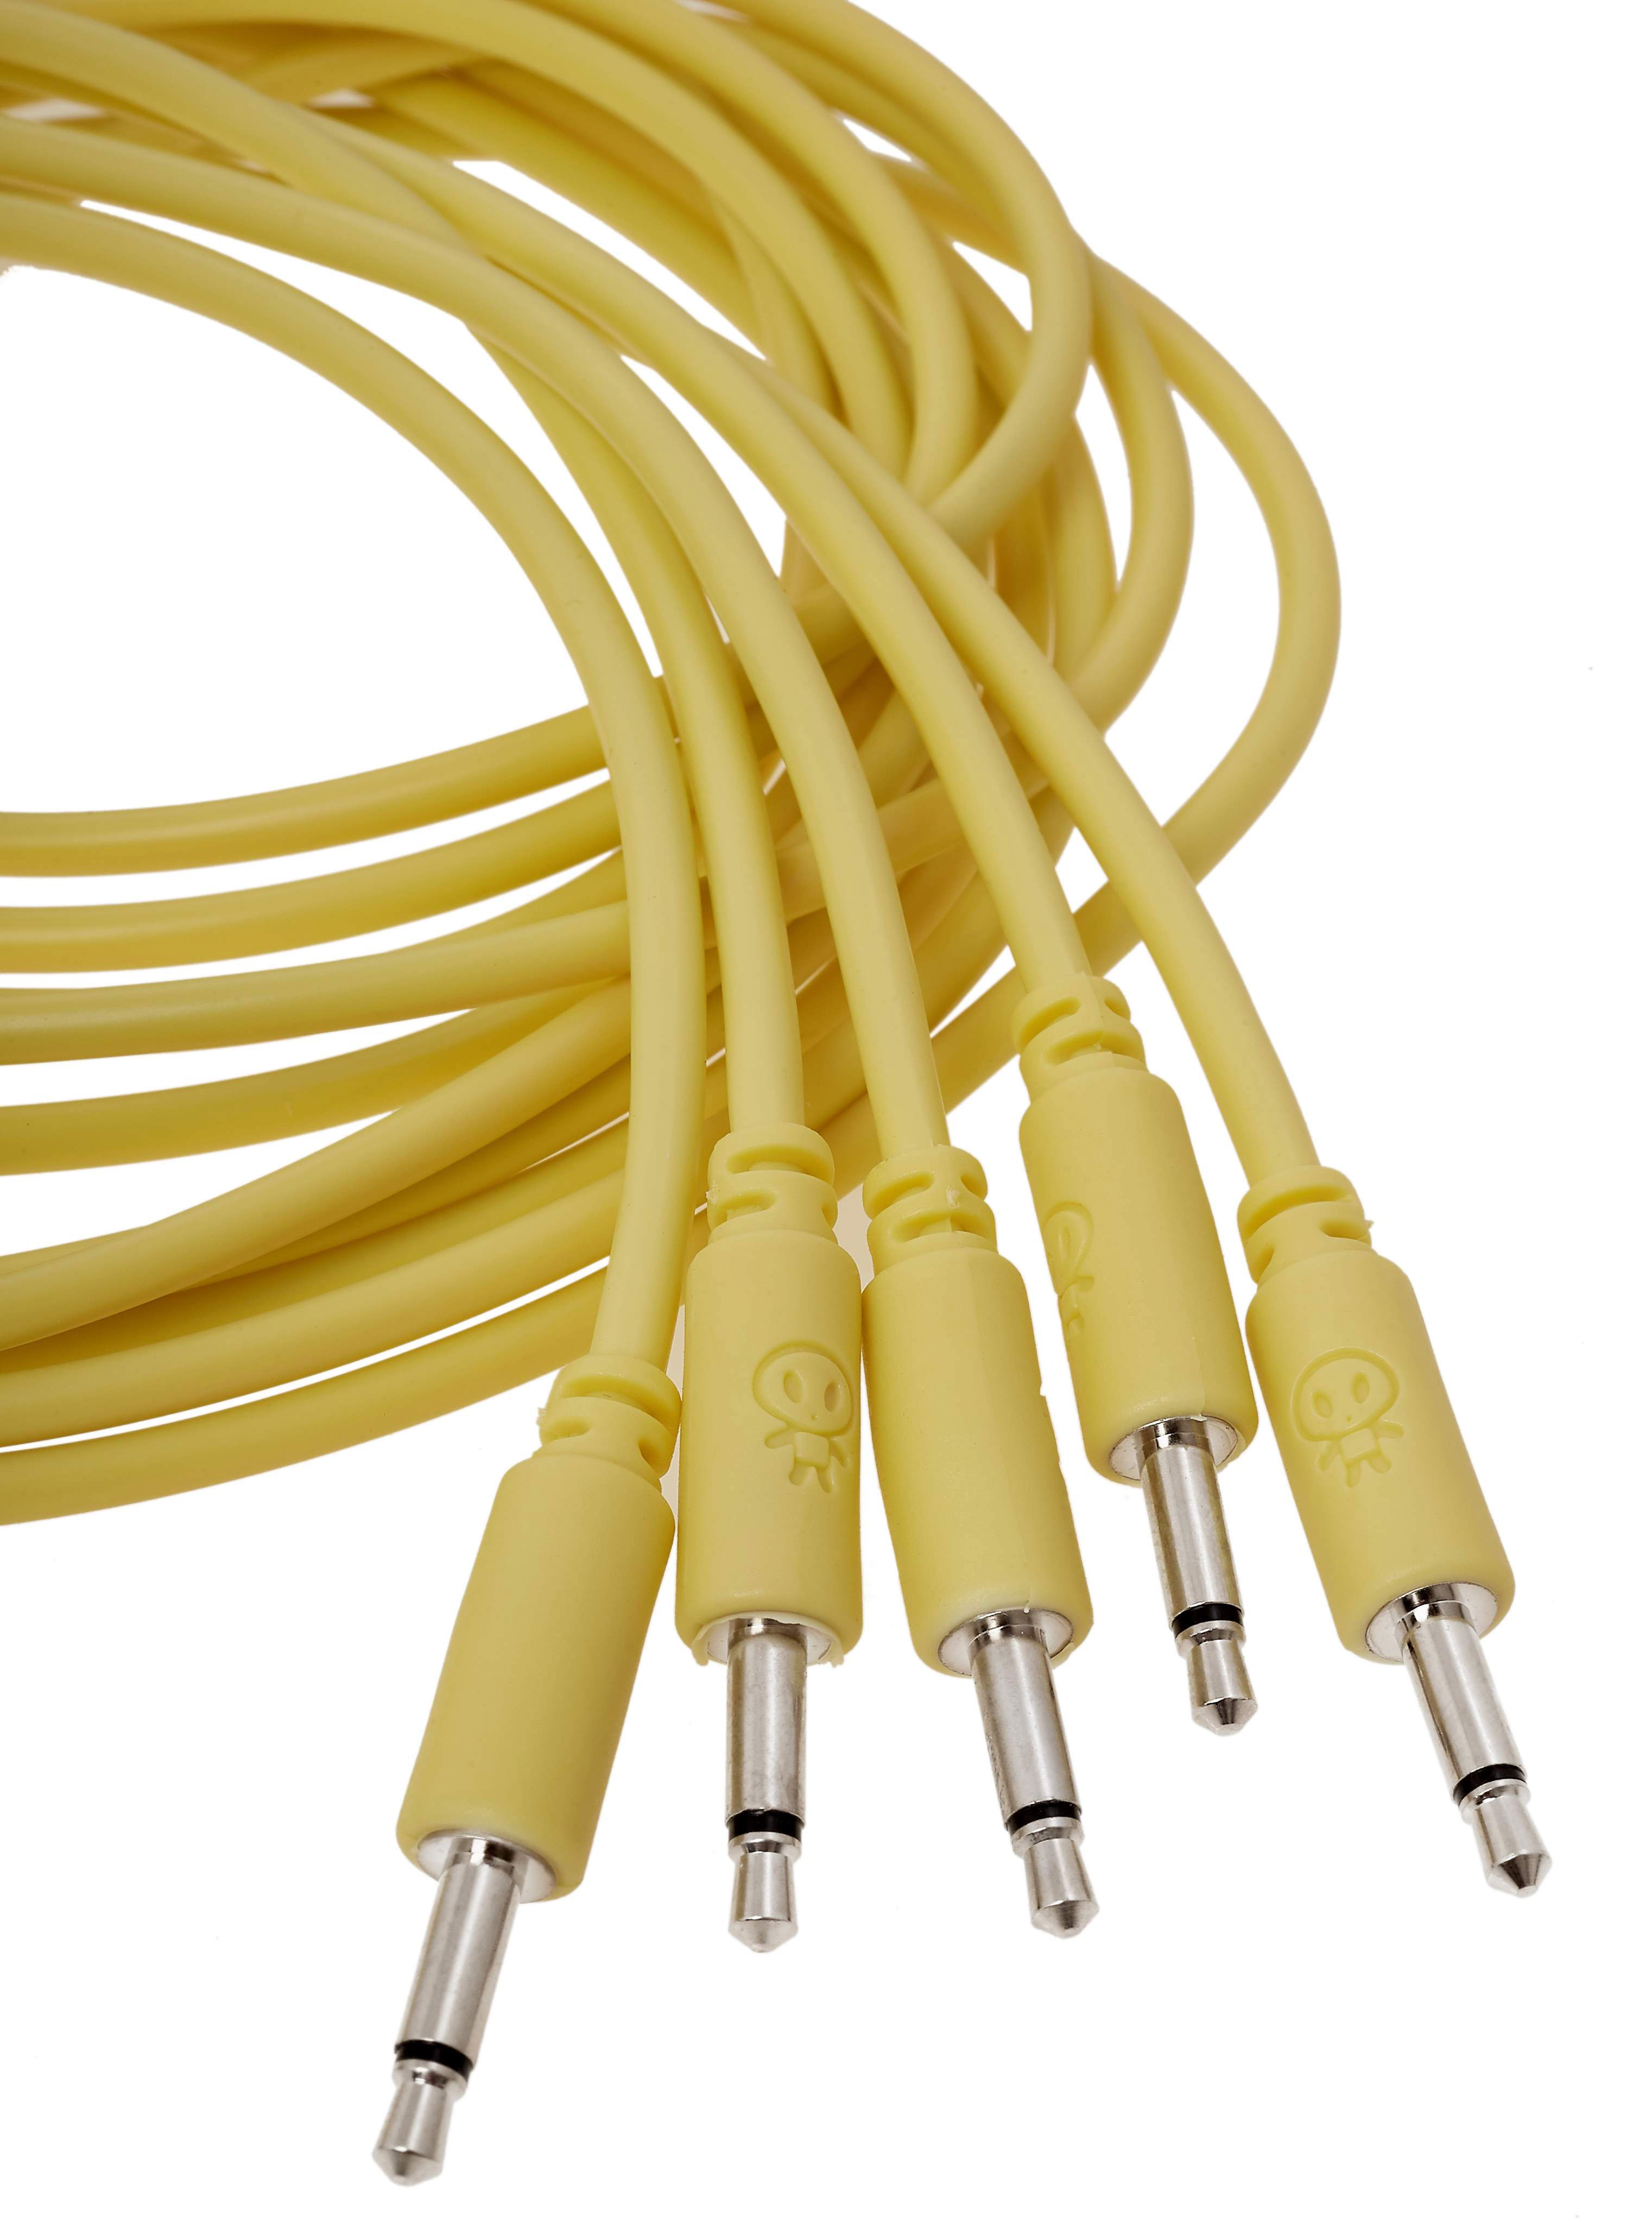 Erica Synths Eurorack Patch Cables 10cm, 5 Pcs Yellow по цене 830 ₽